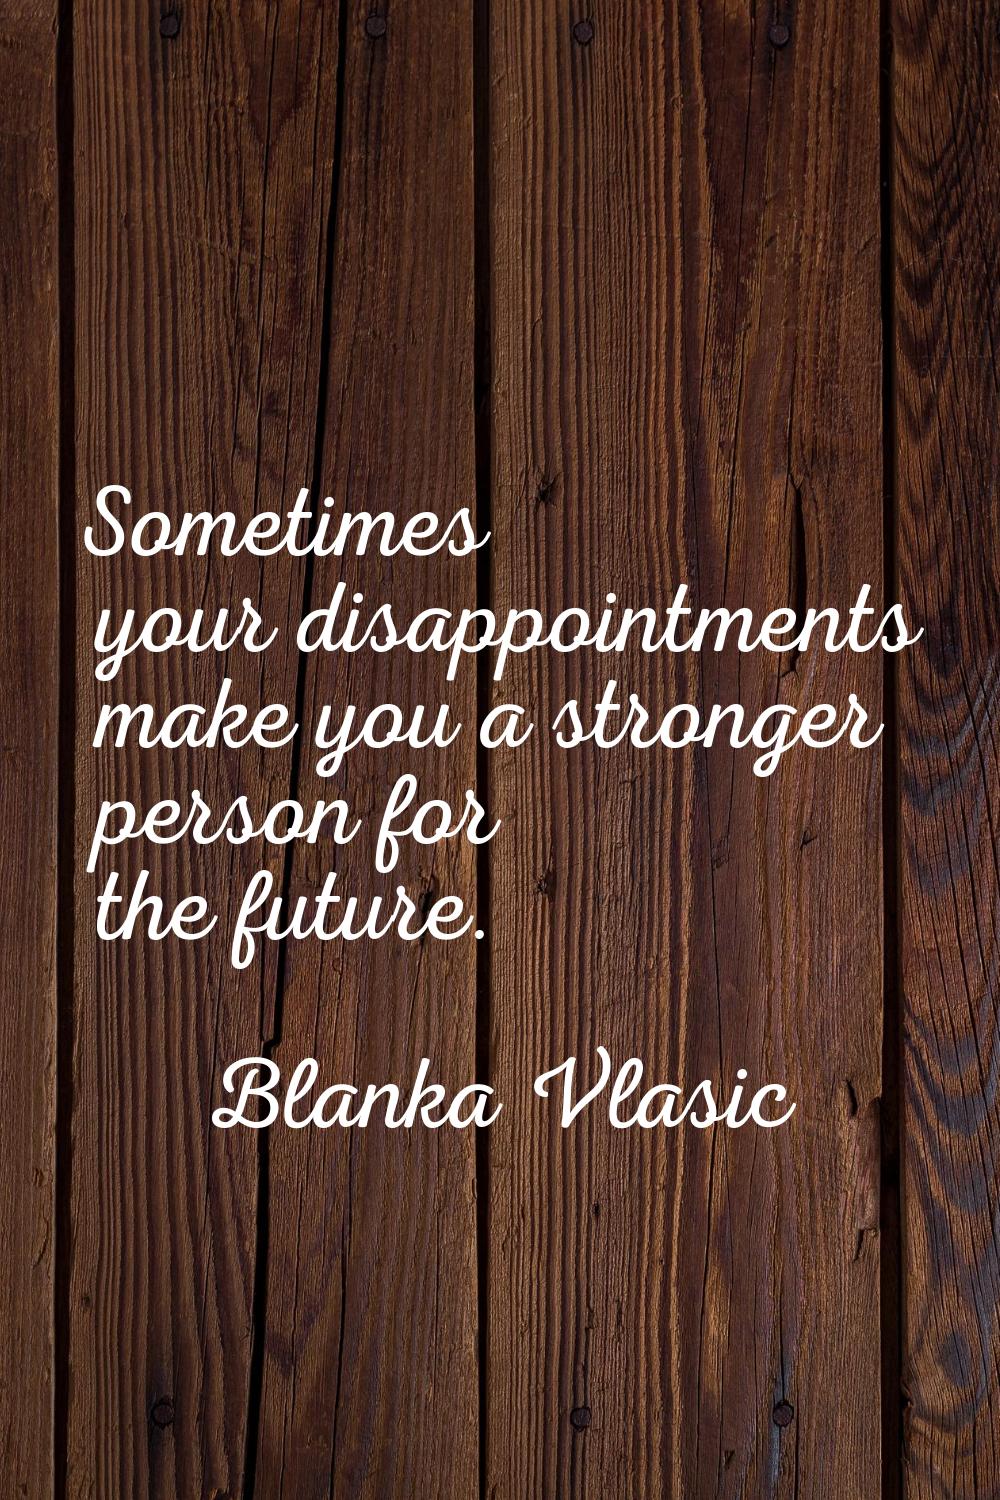 Sometimes your disappointments make you a stronger person for the future.